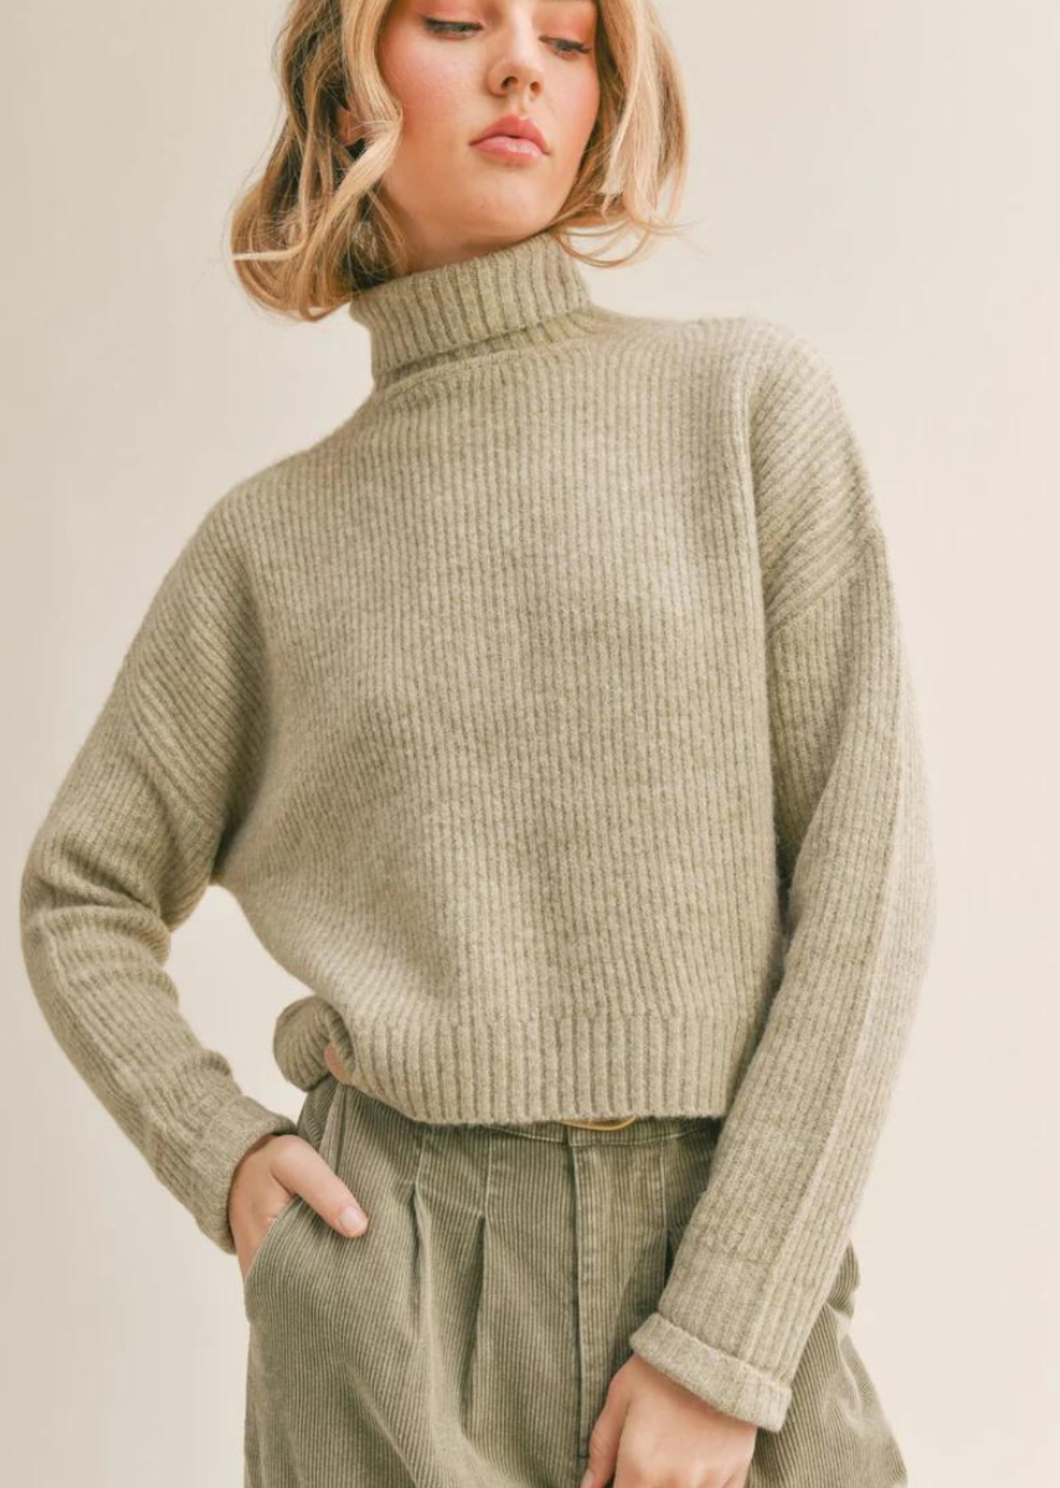 Sage The Label Fiona Pullover